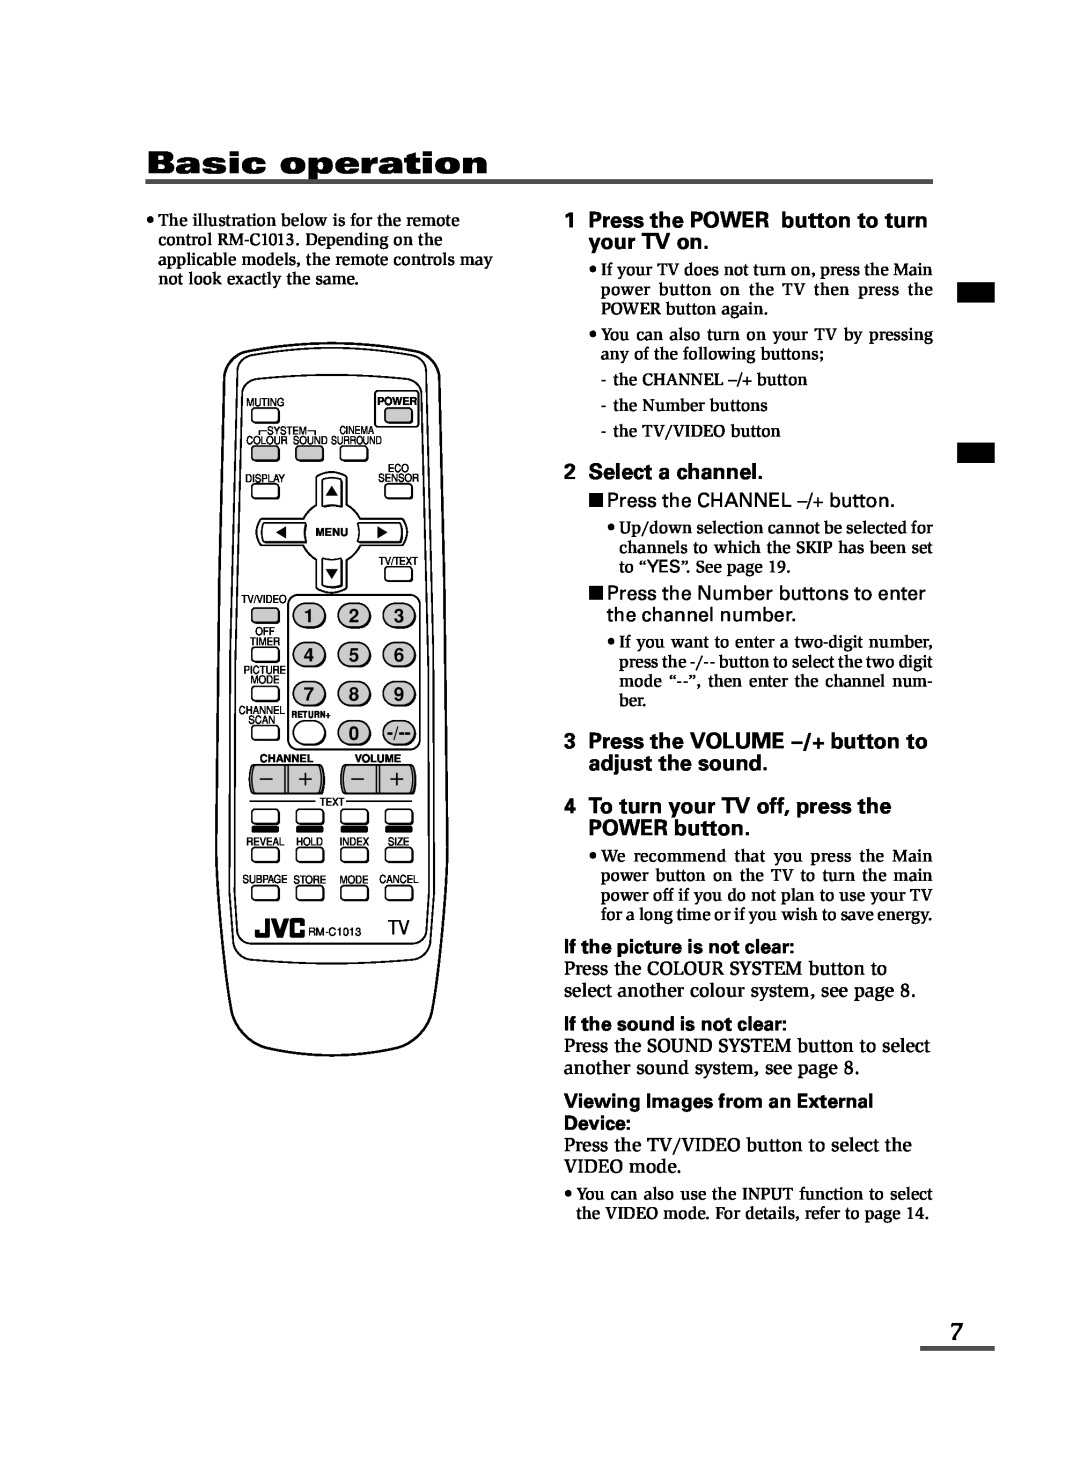 JVC specifications Basic operation, Press the POWER button to turn your TV on, Select a channel 